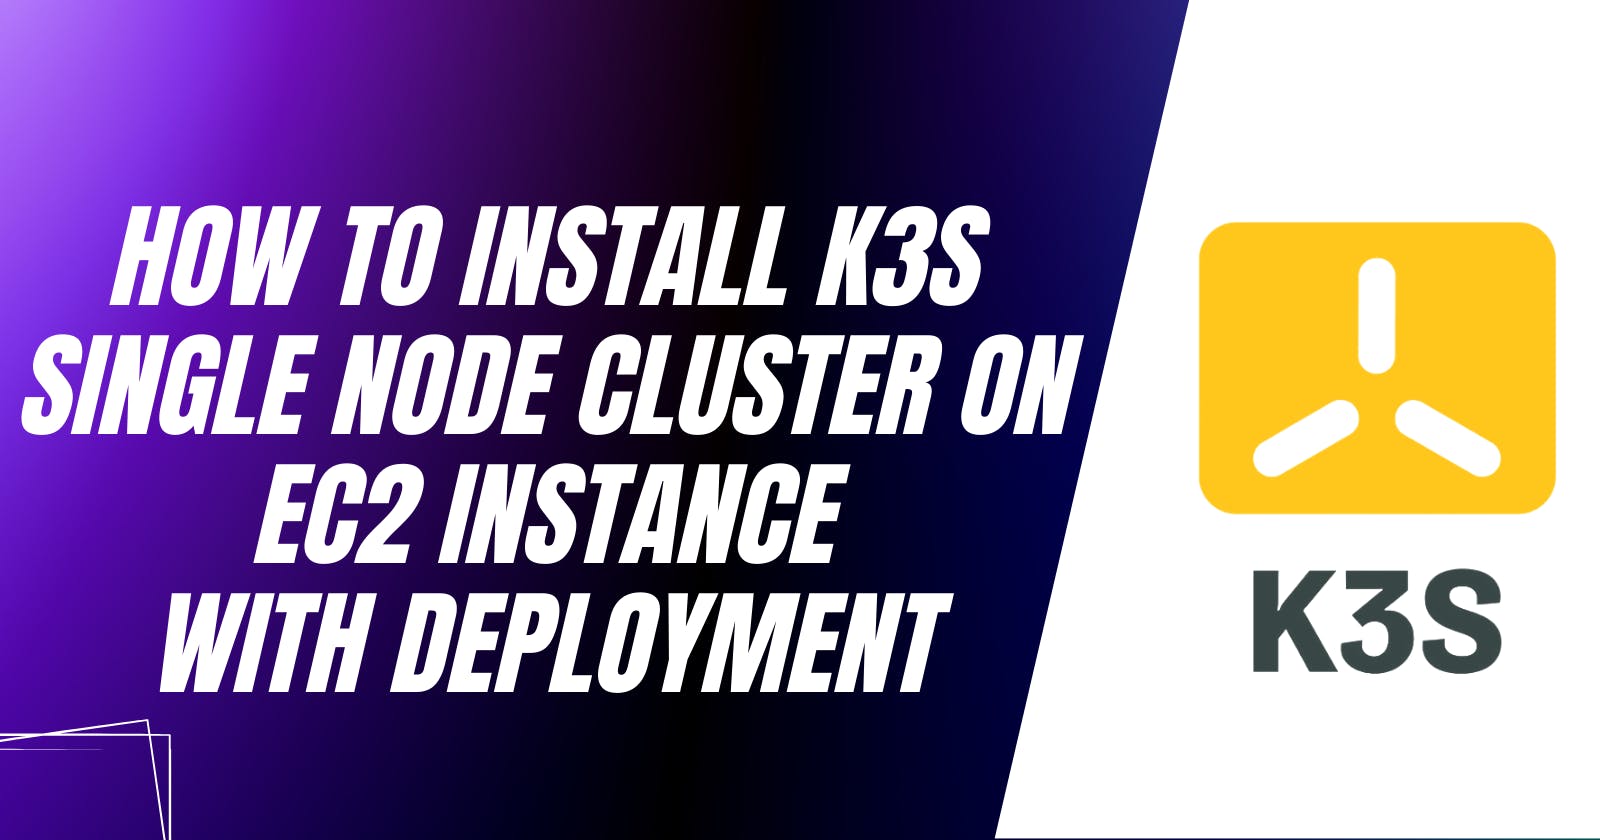 How To Install K3s Single Node Cluster On EC2 Instance With Deployment  Of React App